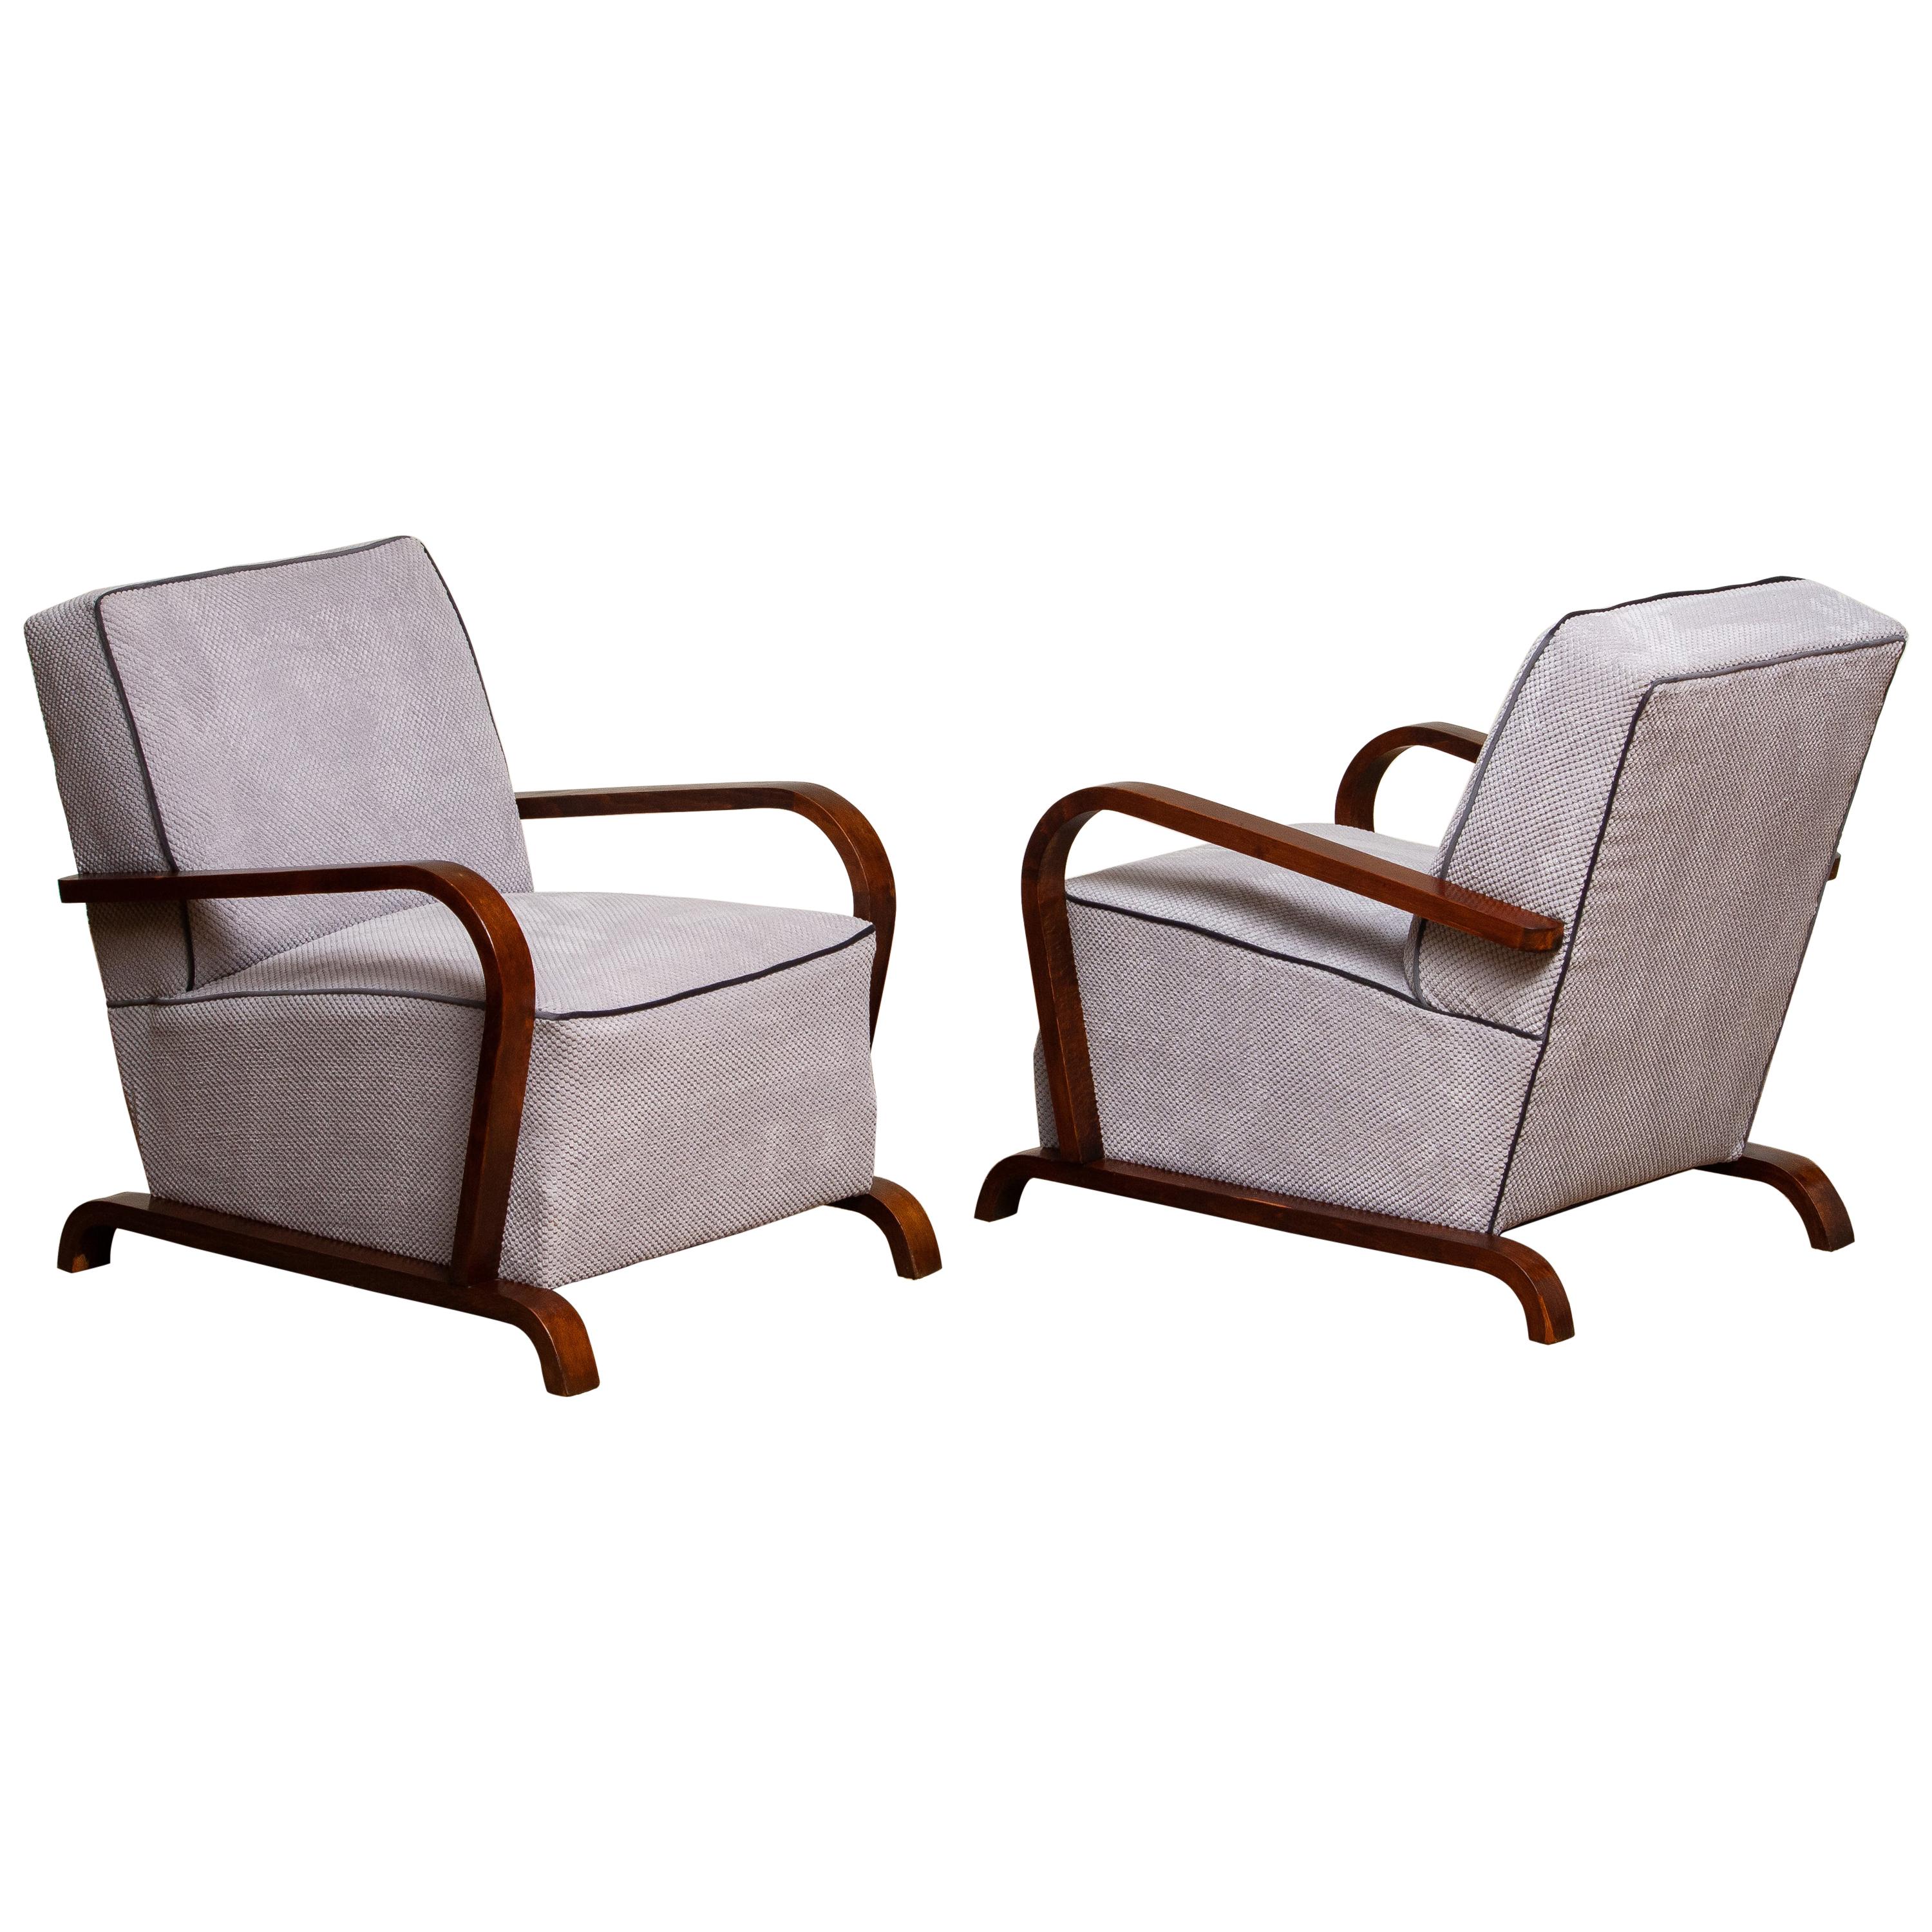 Beautiful set of two Swedish original Art Deco arm, club or lounge club chairs in grey senile fabric with black piping in combination with mahogany colored beech stands and armrests.
The chairs has been restored and newly upholstered, keeping all